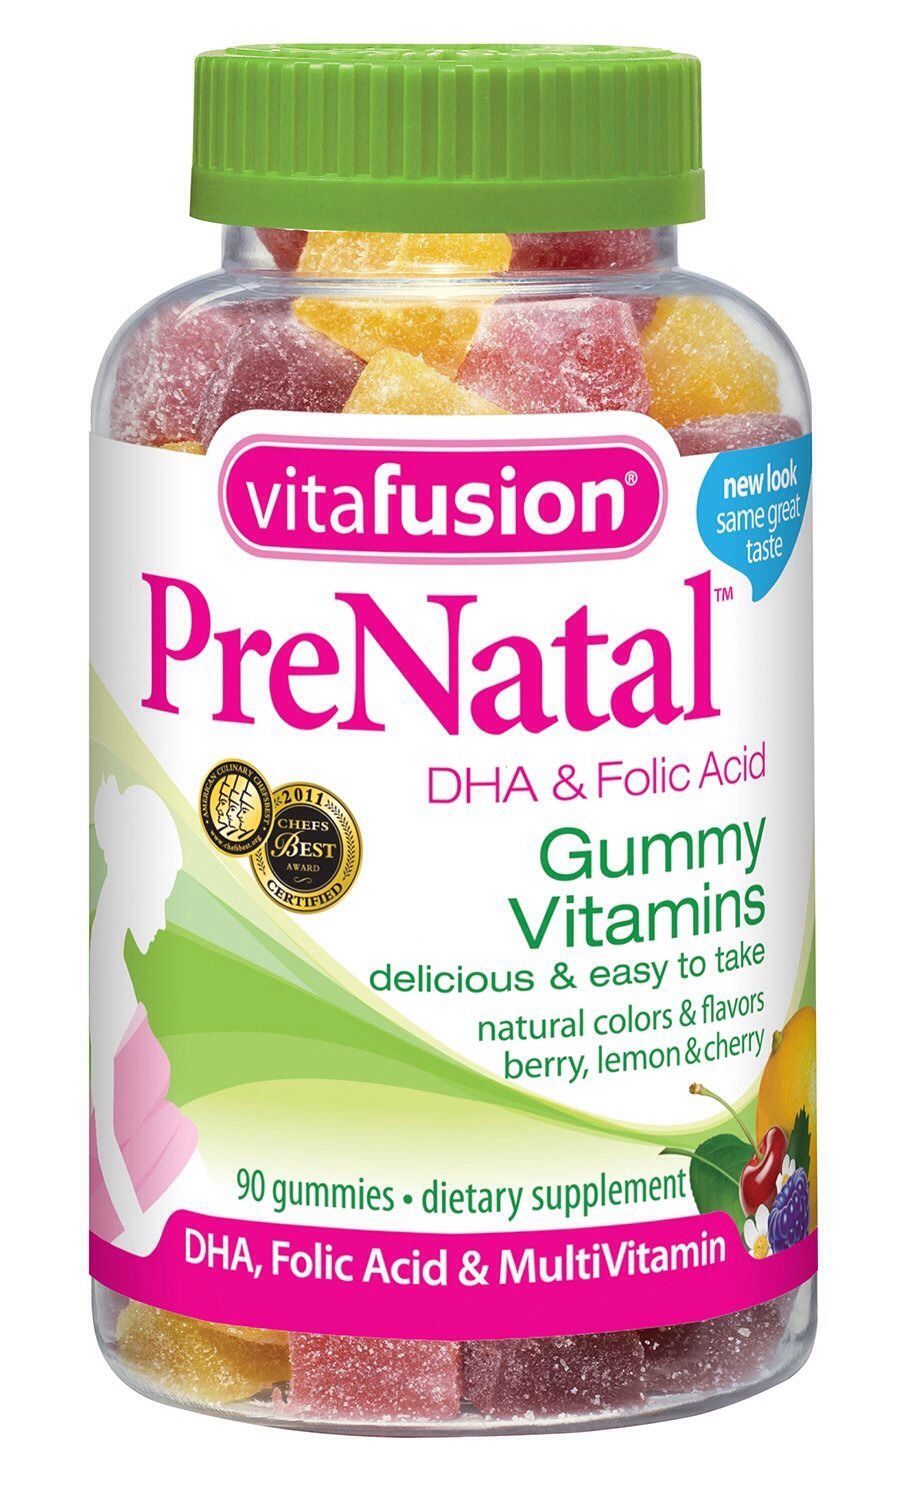 Take Prenatal Vitamins Even If Your Not Pregnant To ...